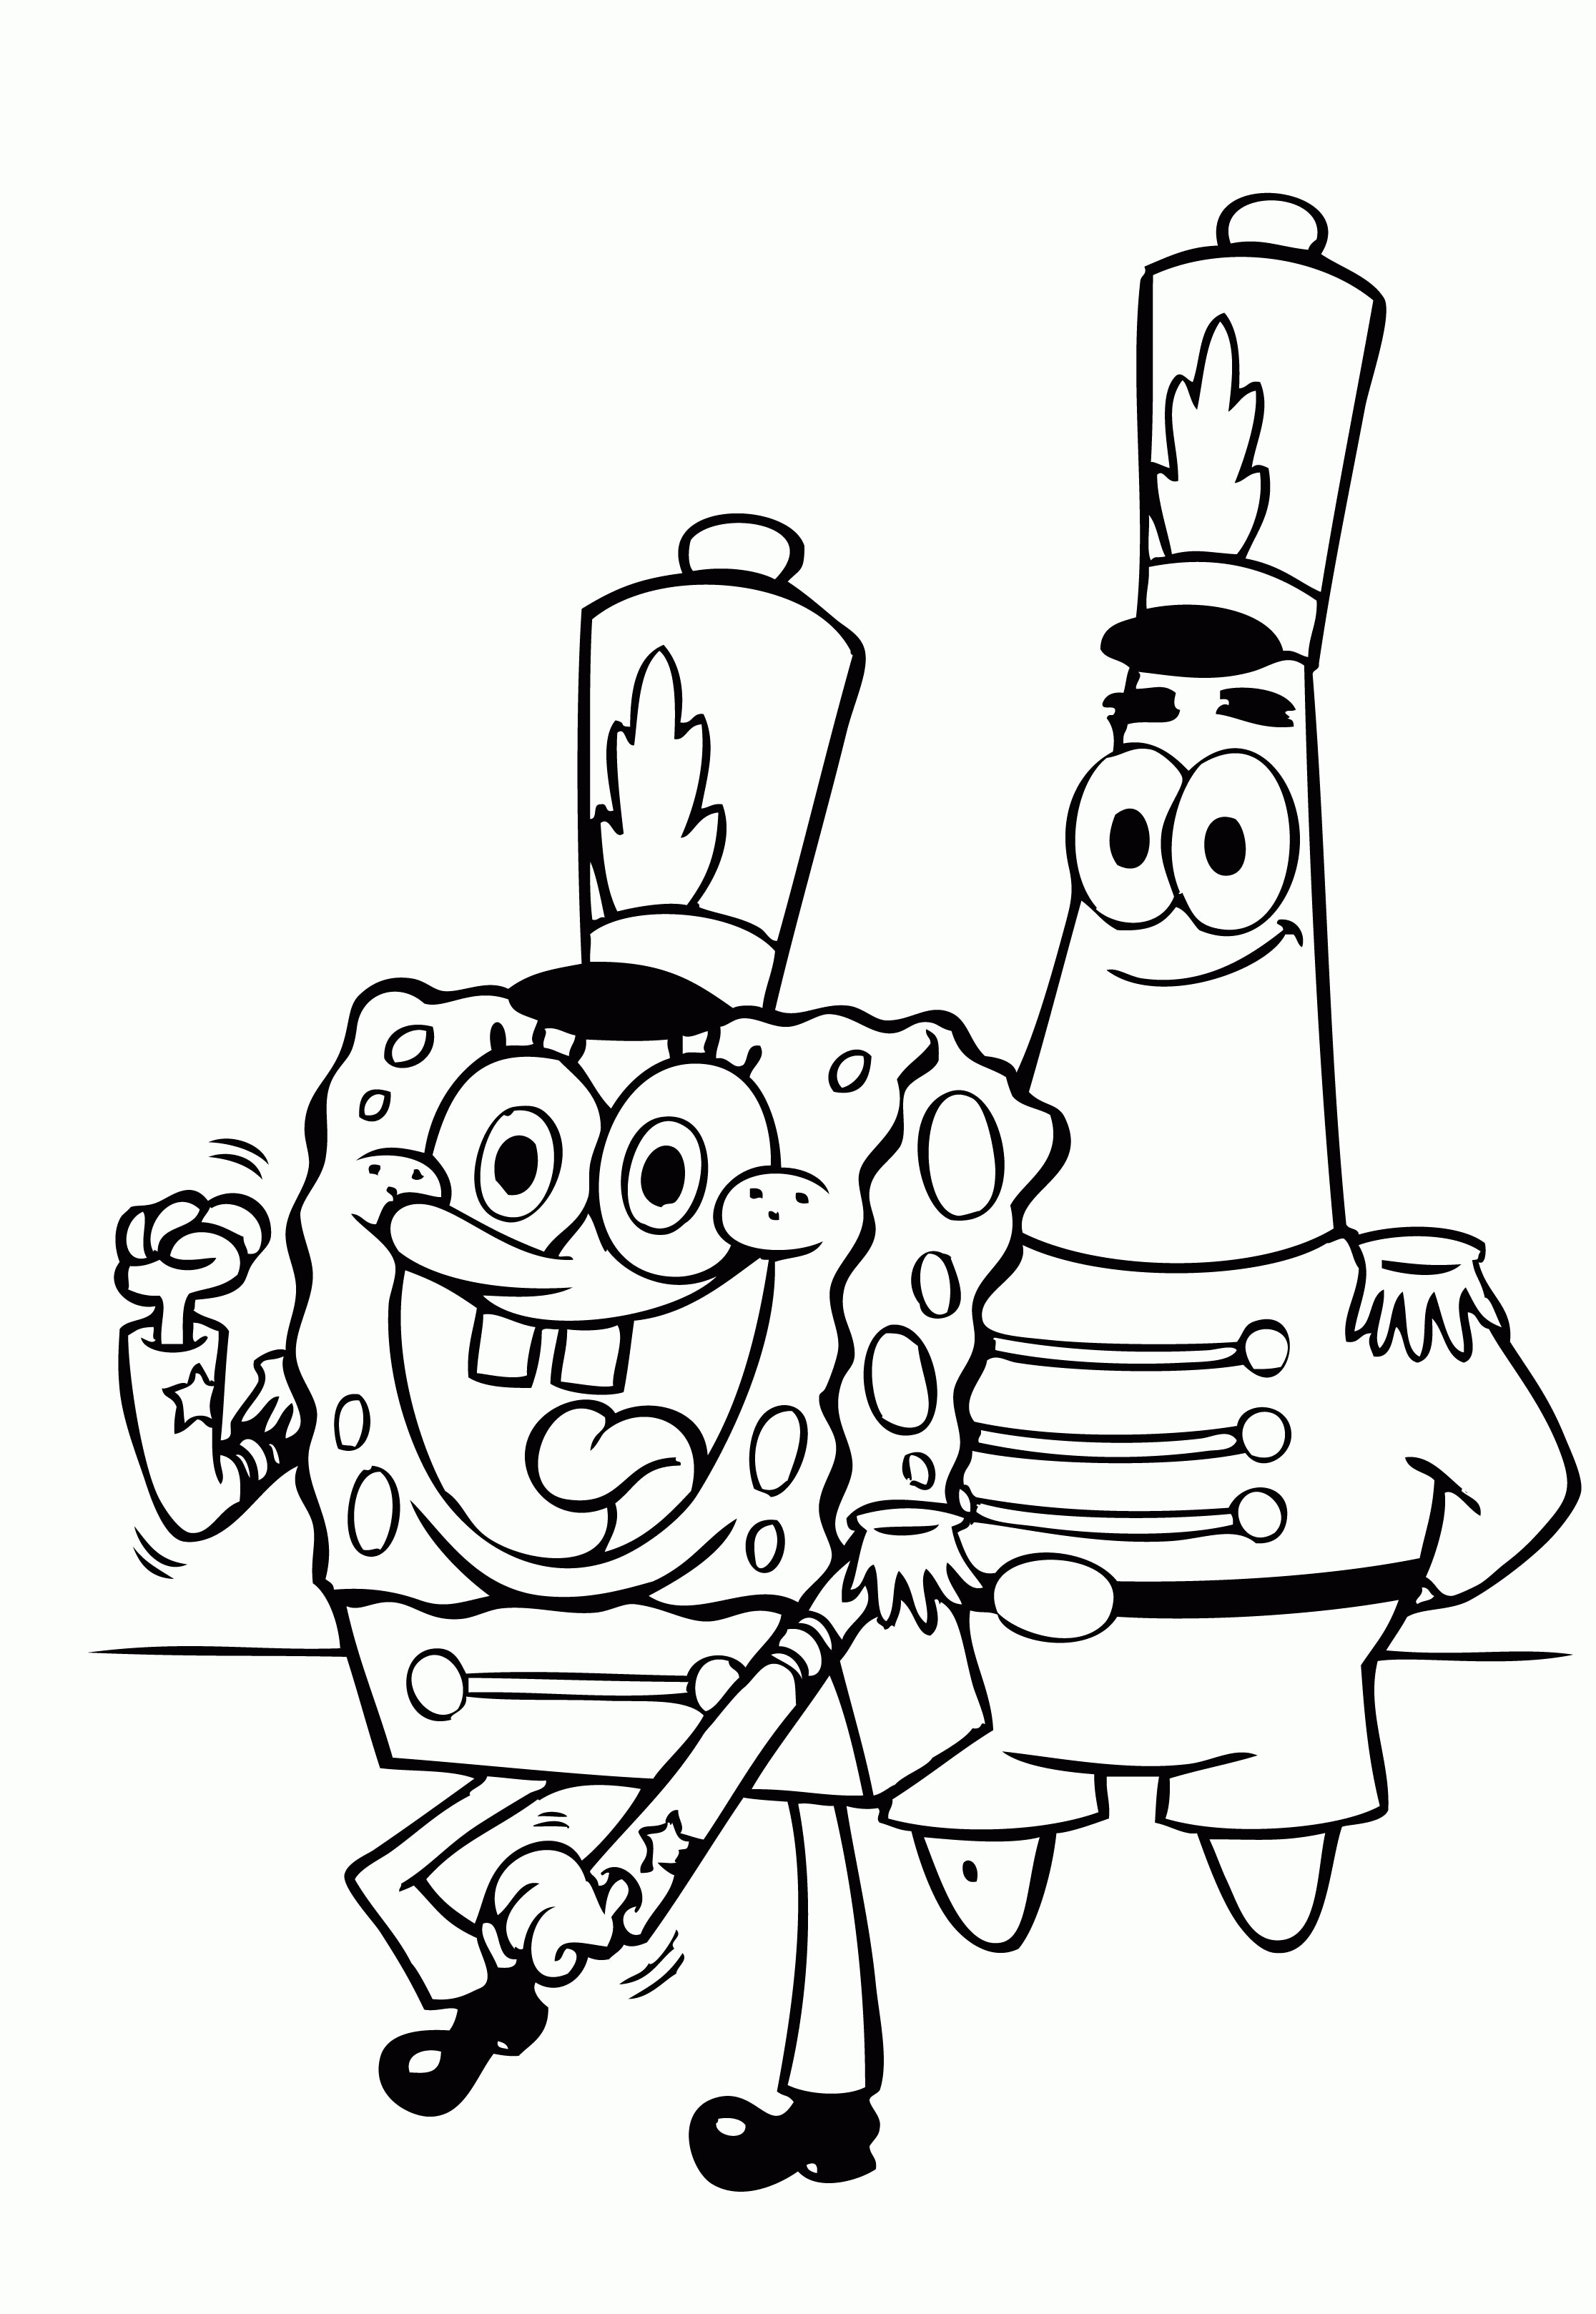 Spongebob Coloring Pages Free For Kids | Cartoon Coloring pages of ...